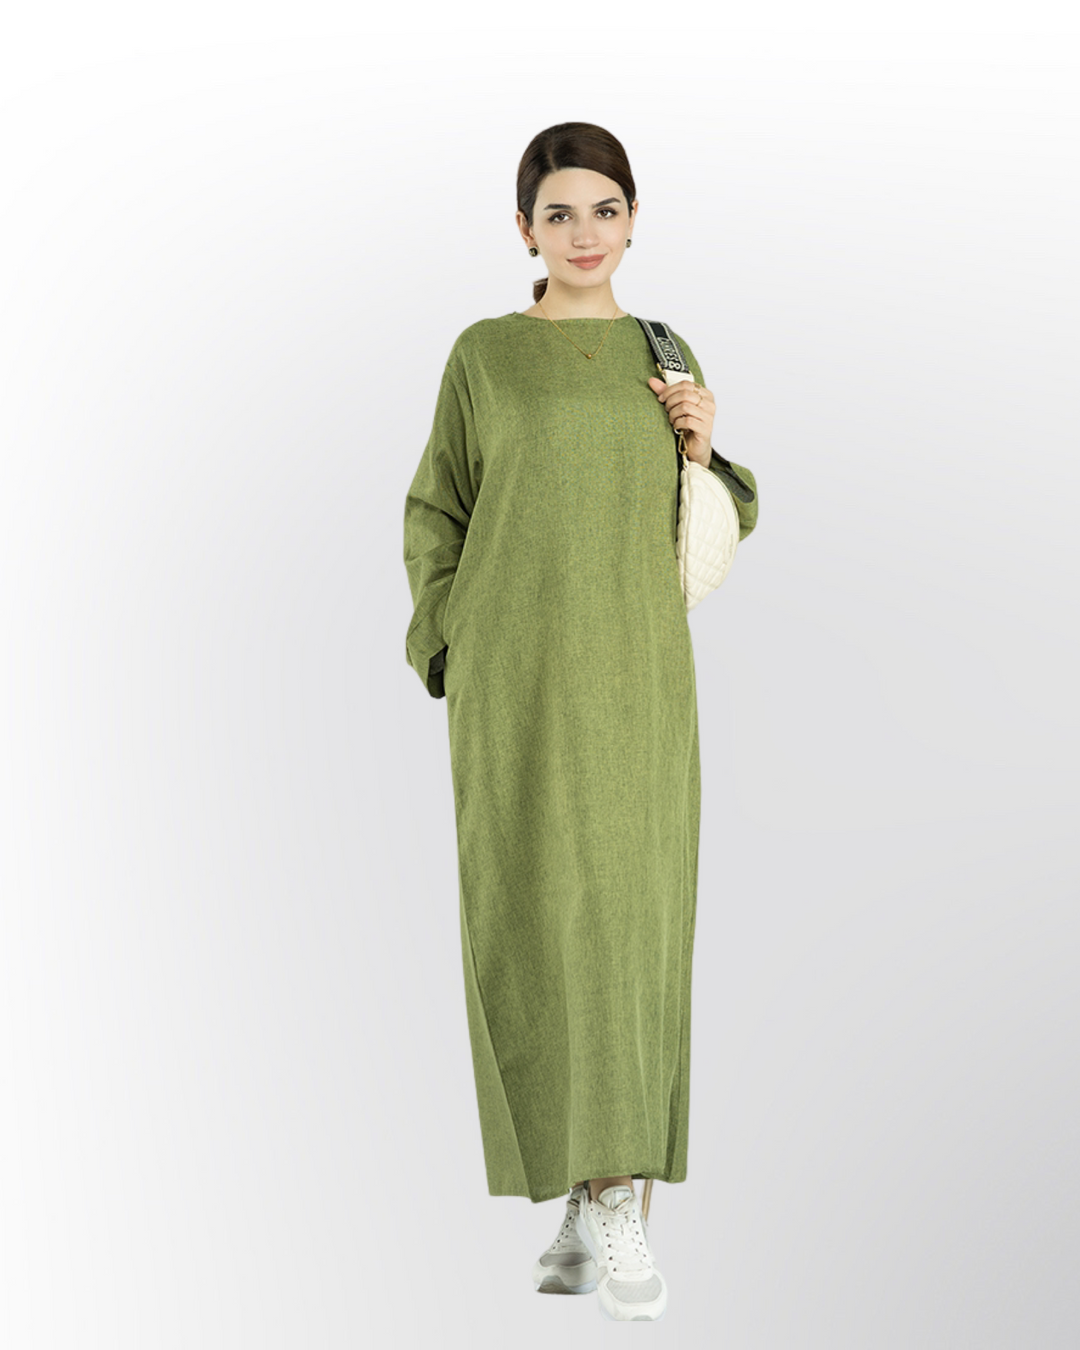 Get trendy with Elora Linen Set - Pistachio - Dresses available at Voilee NY. Grab yours for $99.90 today!